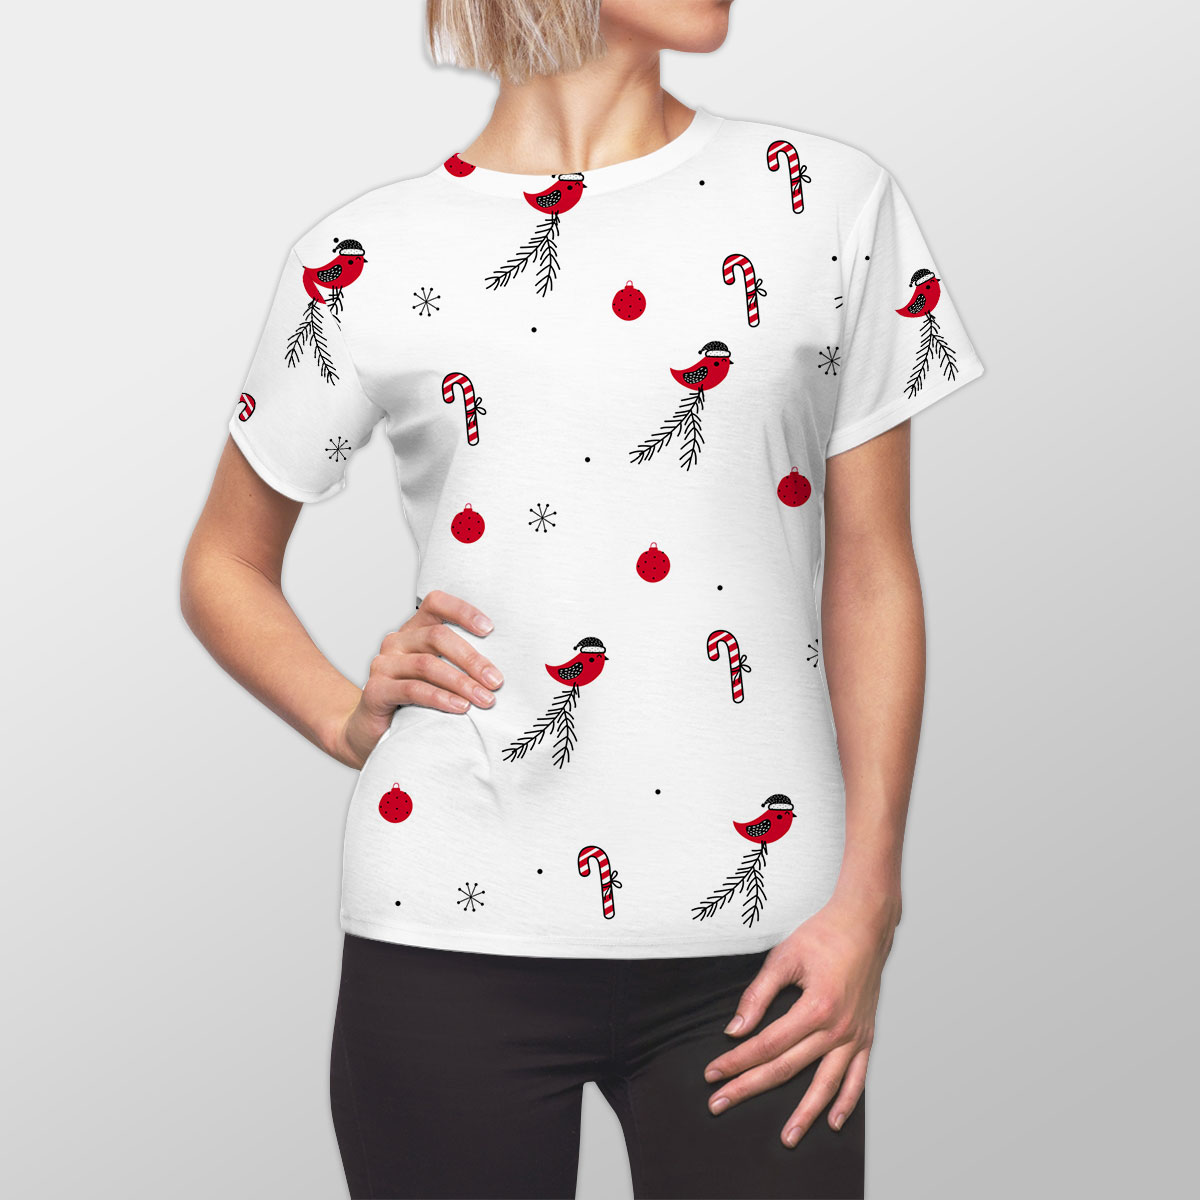 Cardinal Bird With Santa Hat, Candy Canes, Christmas Balls And Snowflake Clipart Seamless White Pattern Women Cut Sew Tee